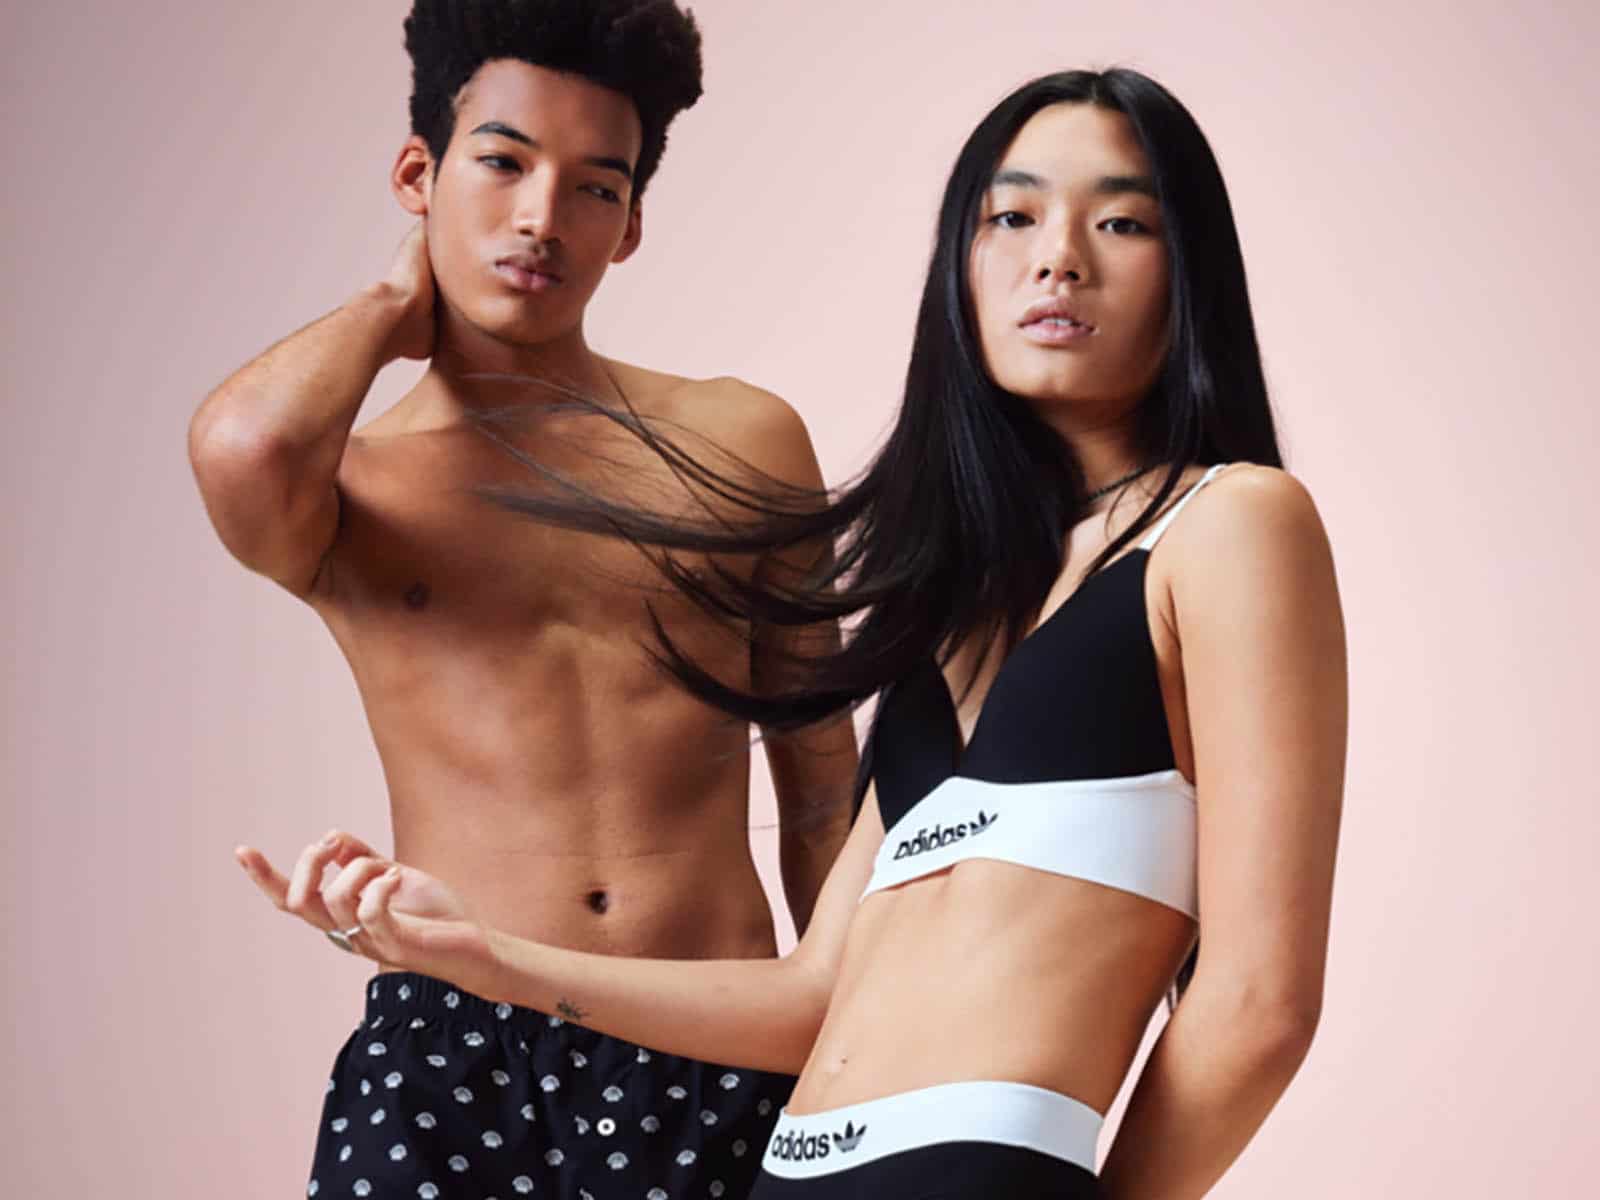 adidas and Delta Galil Introduce Full-Range Underwear Collections